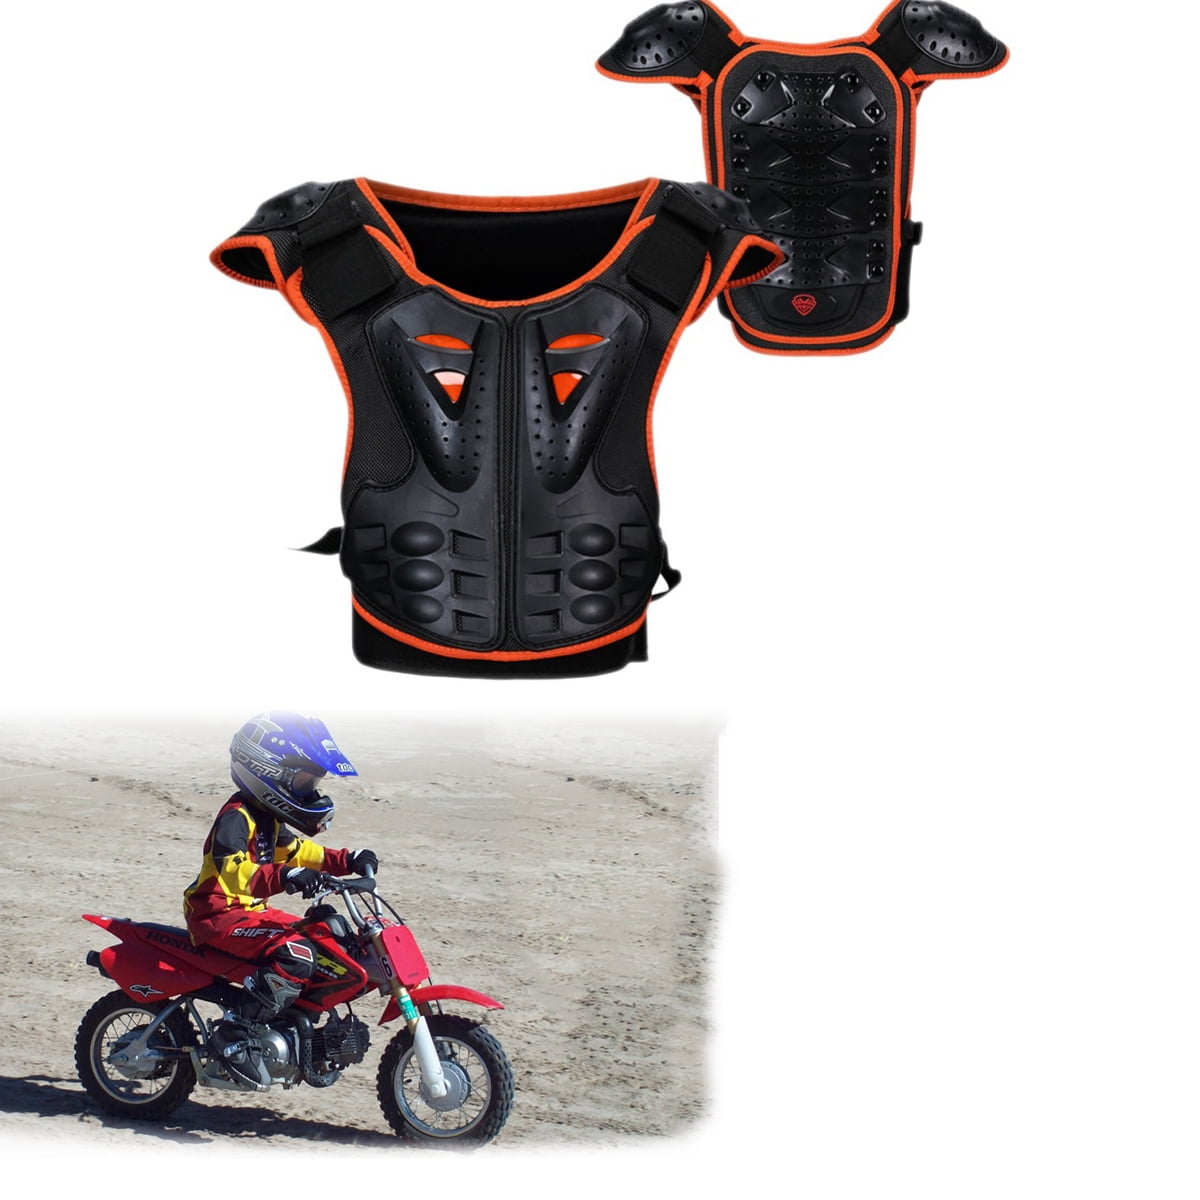 Bikers wear body armour kids Motorcycle Protective Motocross Body Armour Chest Protector Guard Jacket Dirt bike Racing Safety Armour 